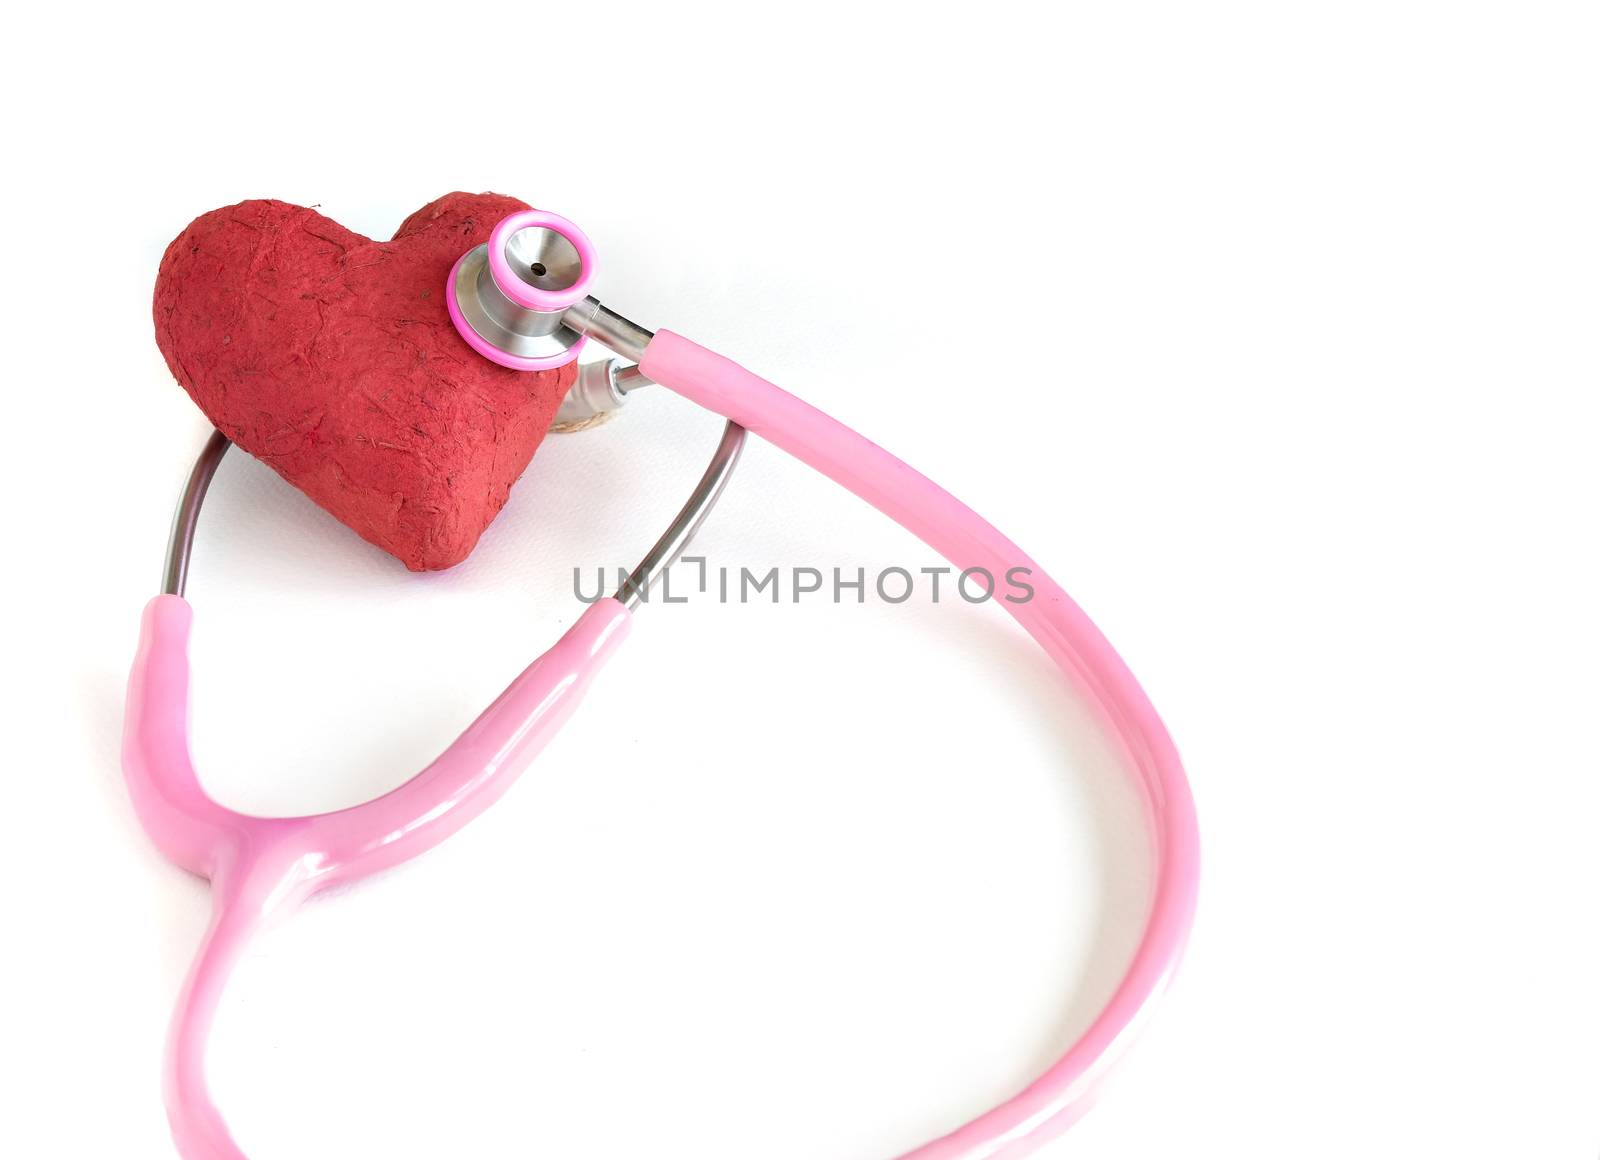 A stethoscope and a handmade red paper mache heart.